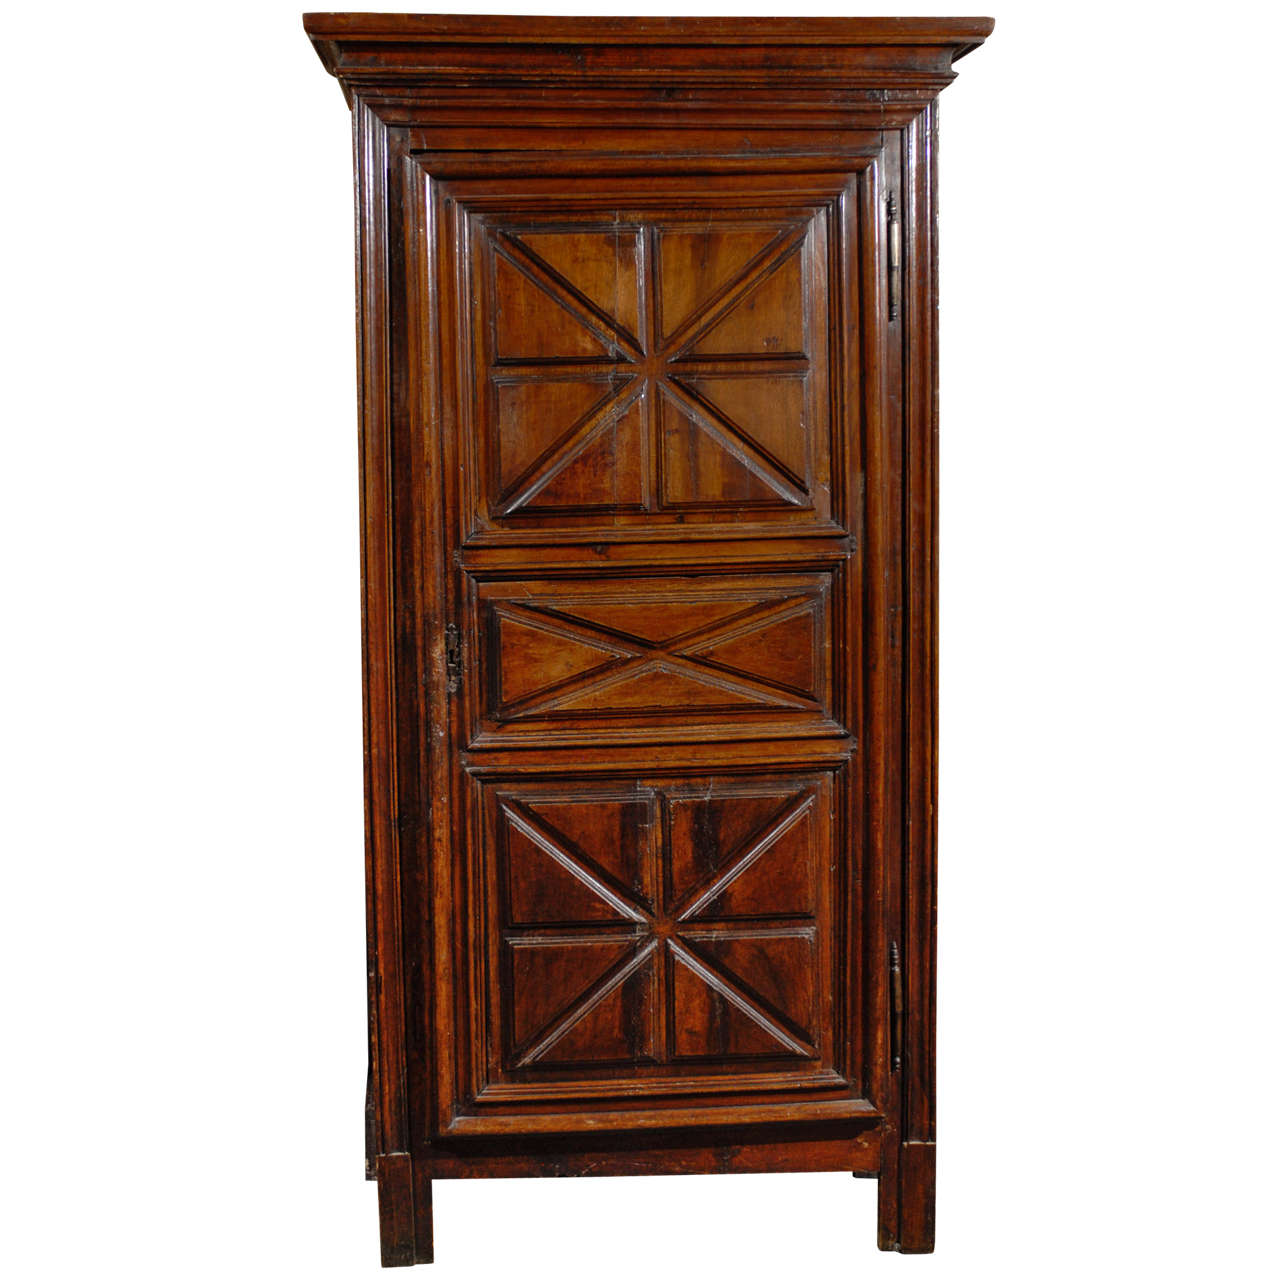 18th Century French Bonnetière Armoire with Geometric Patterns on Single Door